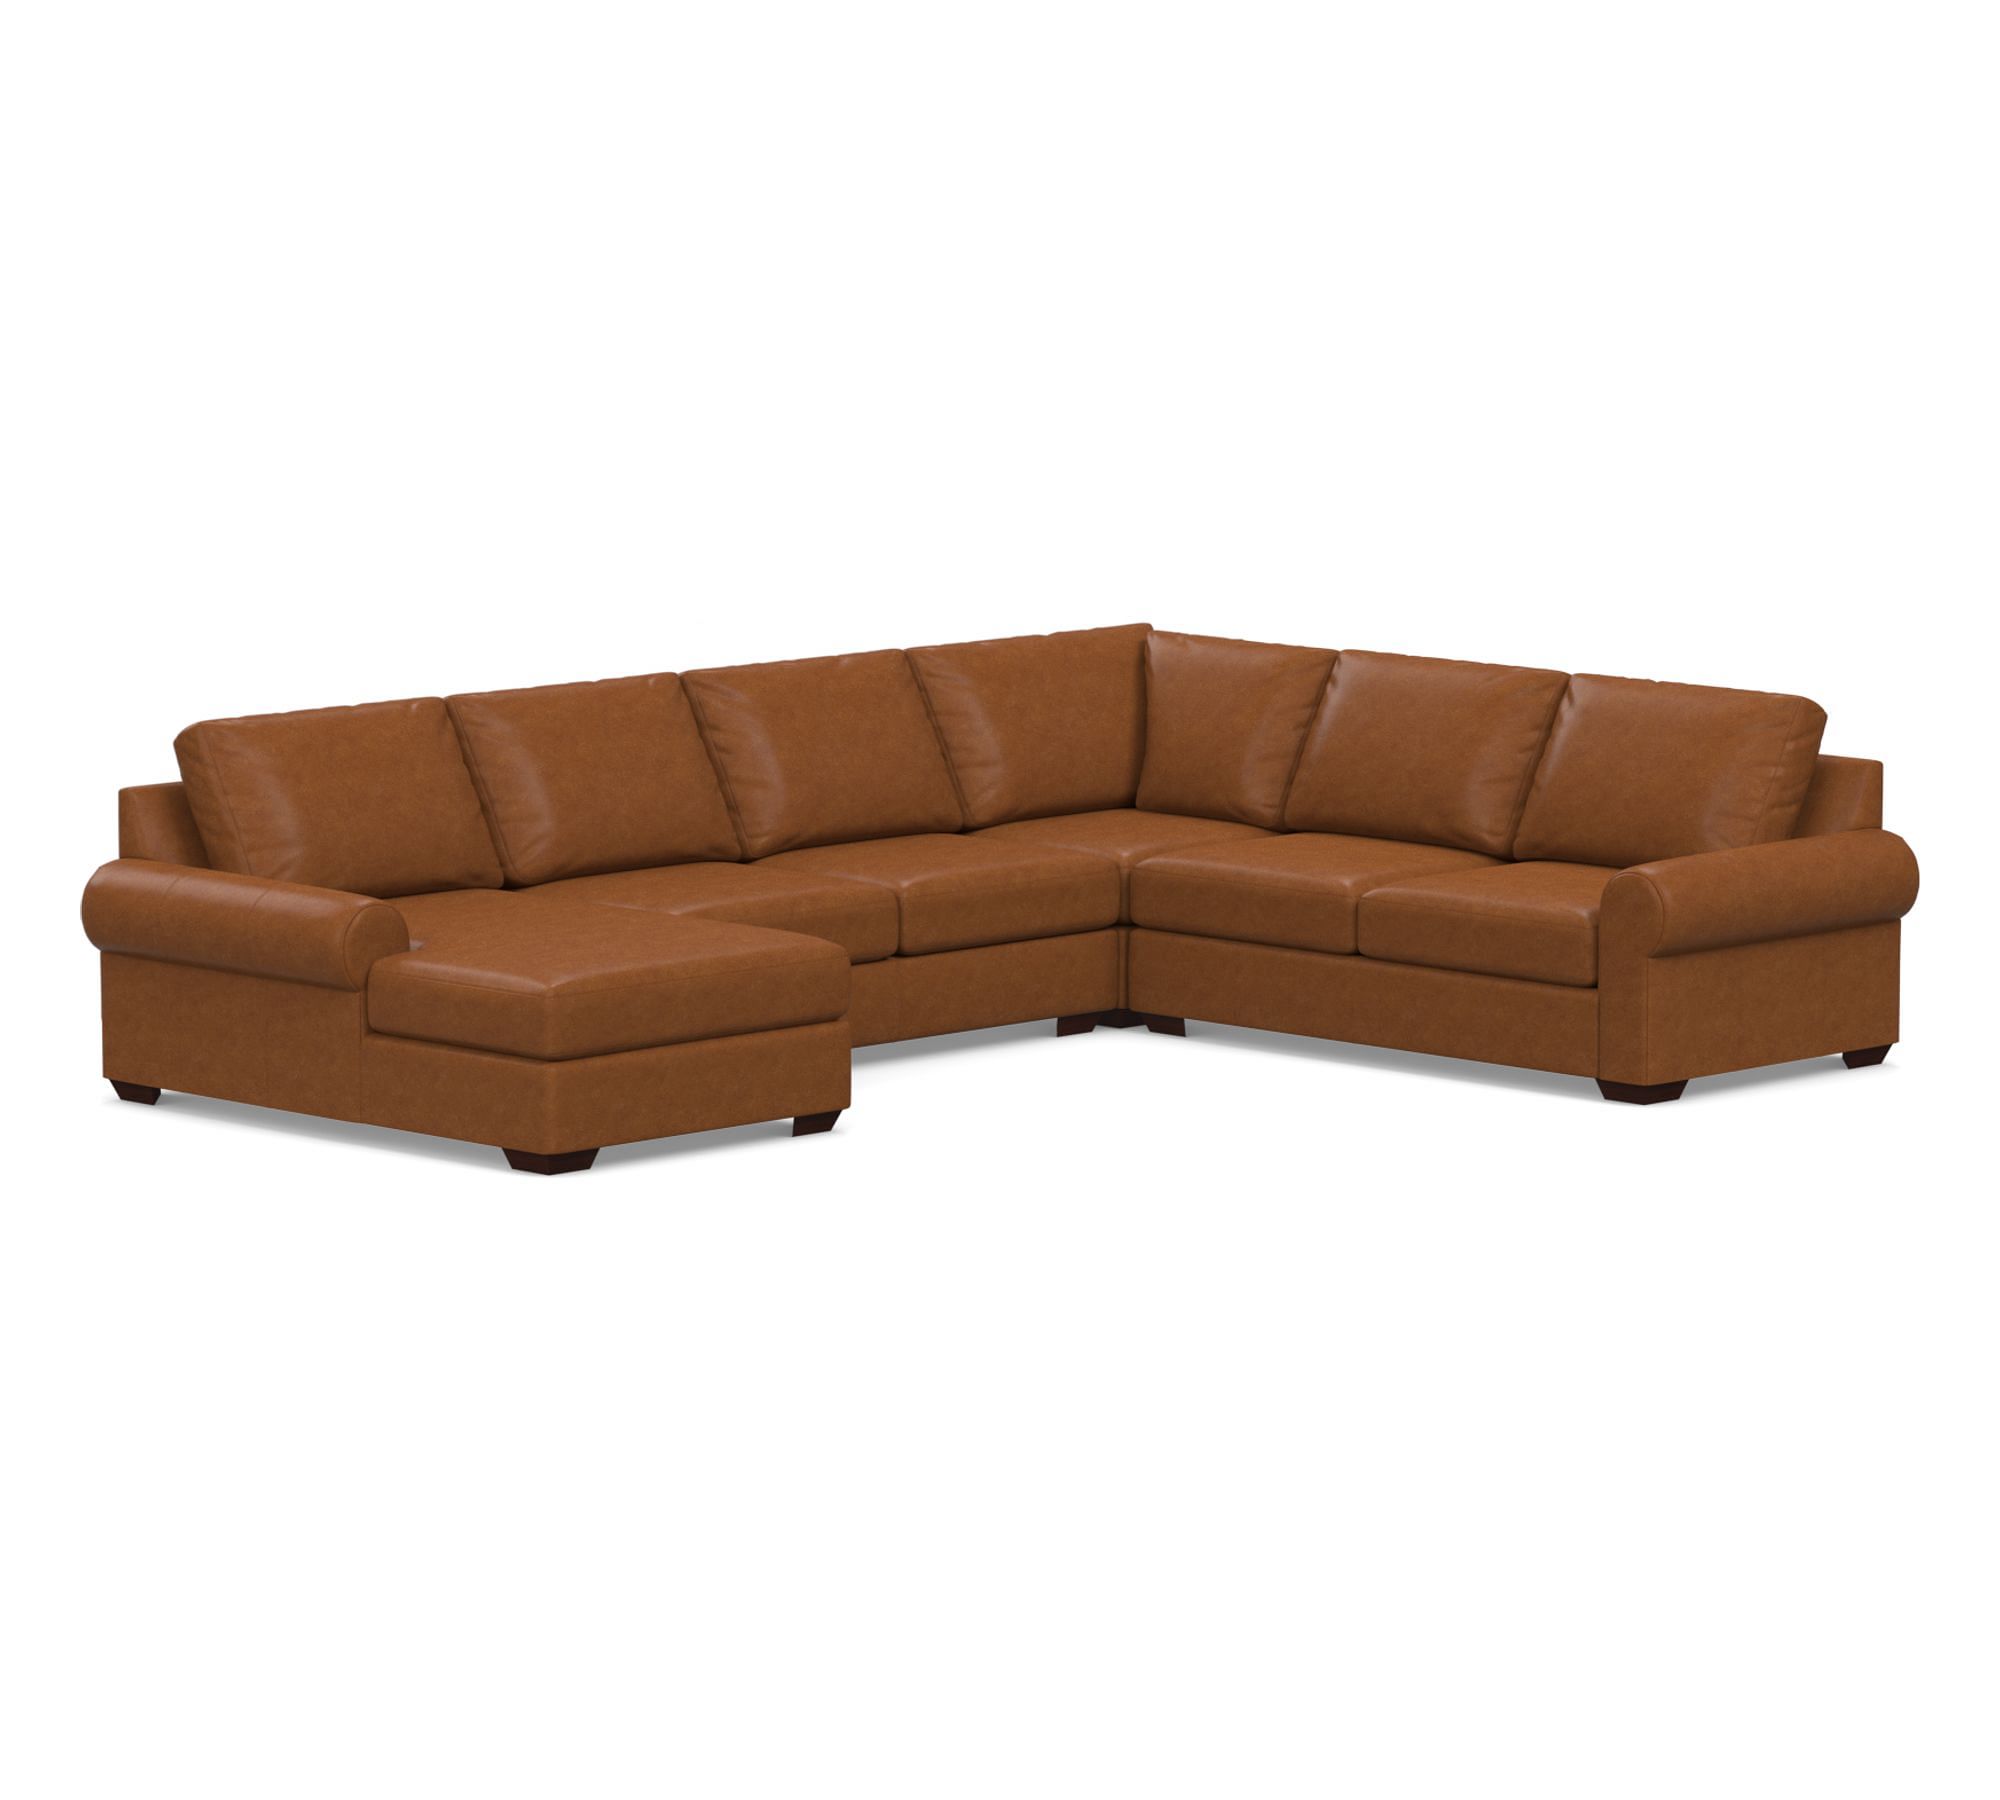 Big Sur Roll Arm Leather 4-Piece Chaise Sectional (147")